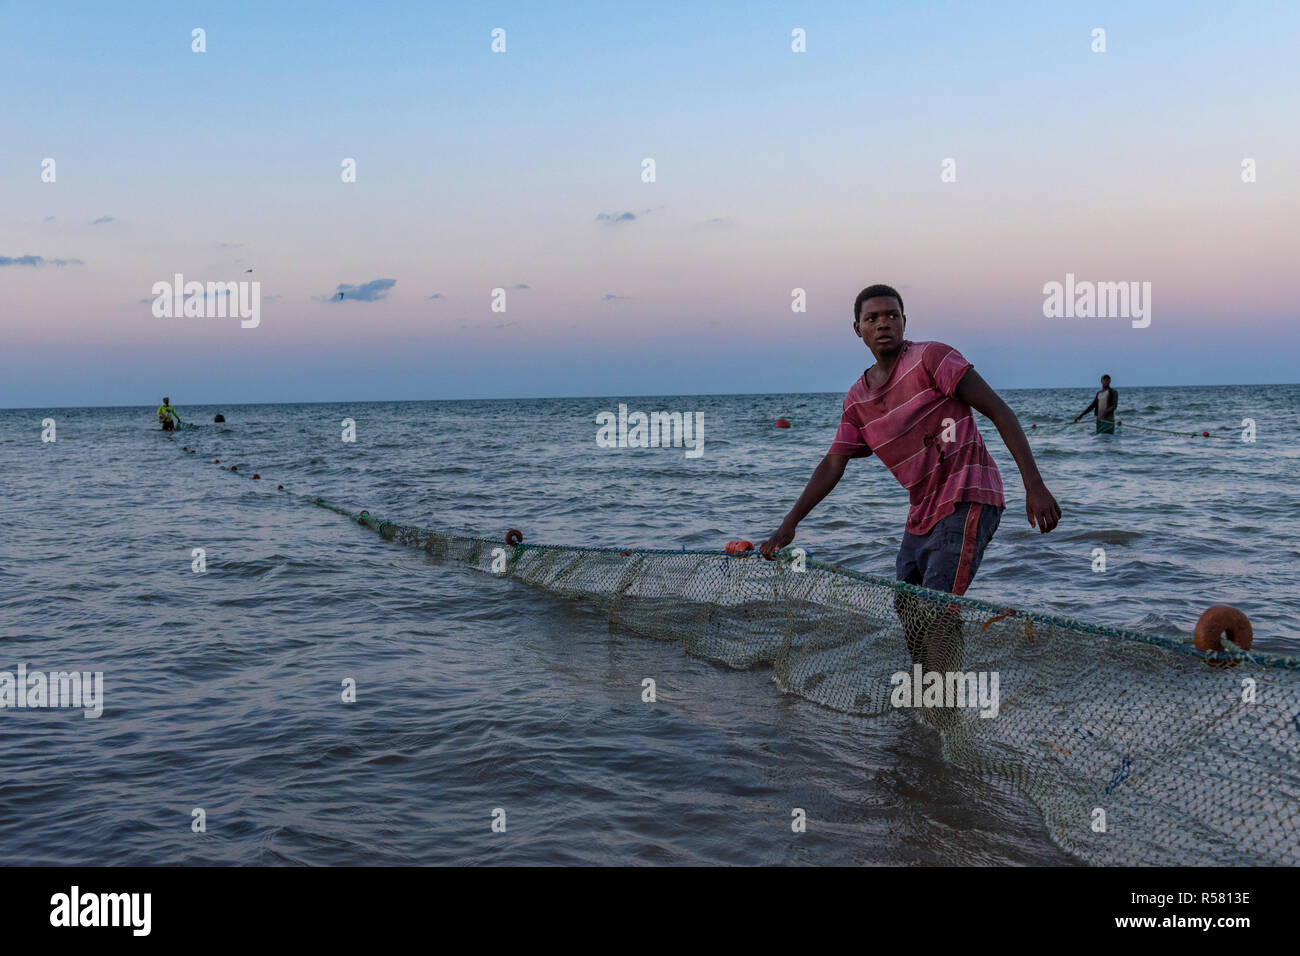 Fishermen haul out there nets in Mozambique. Stock Photo